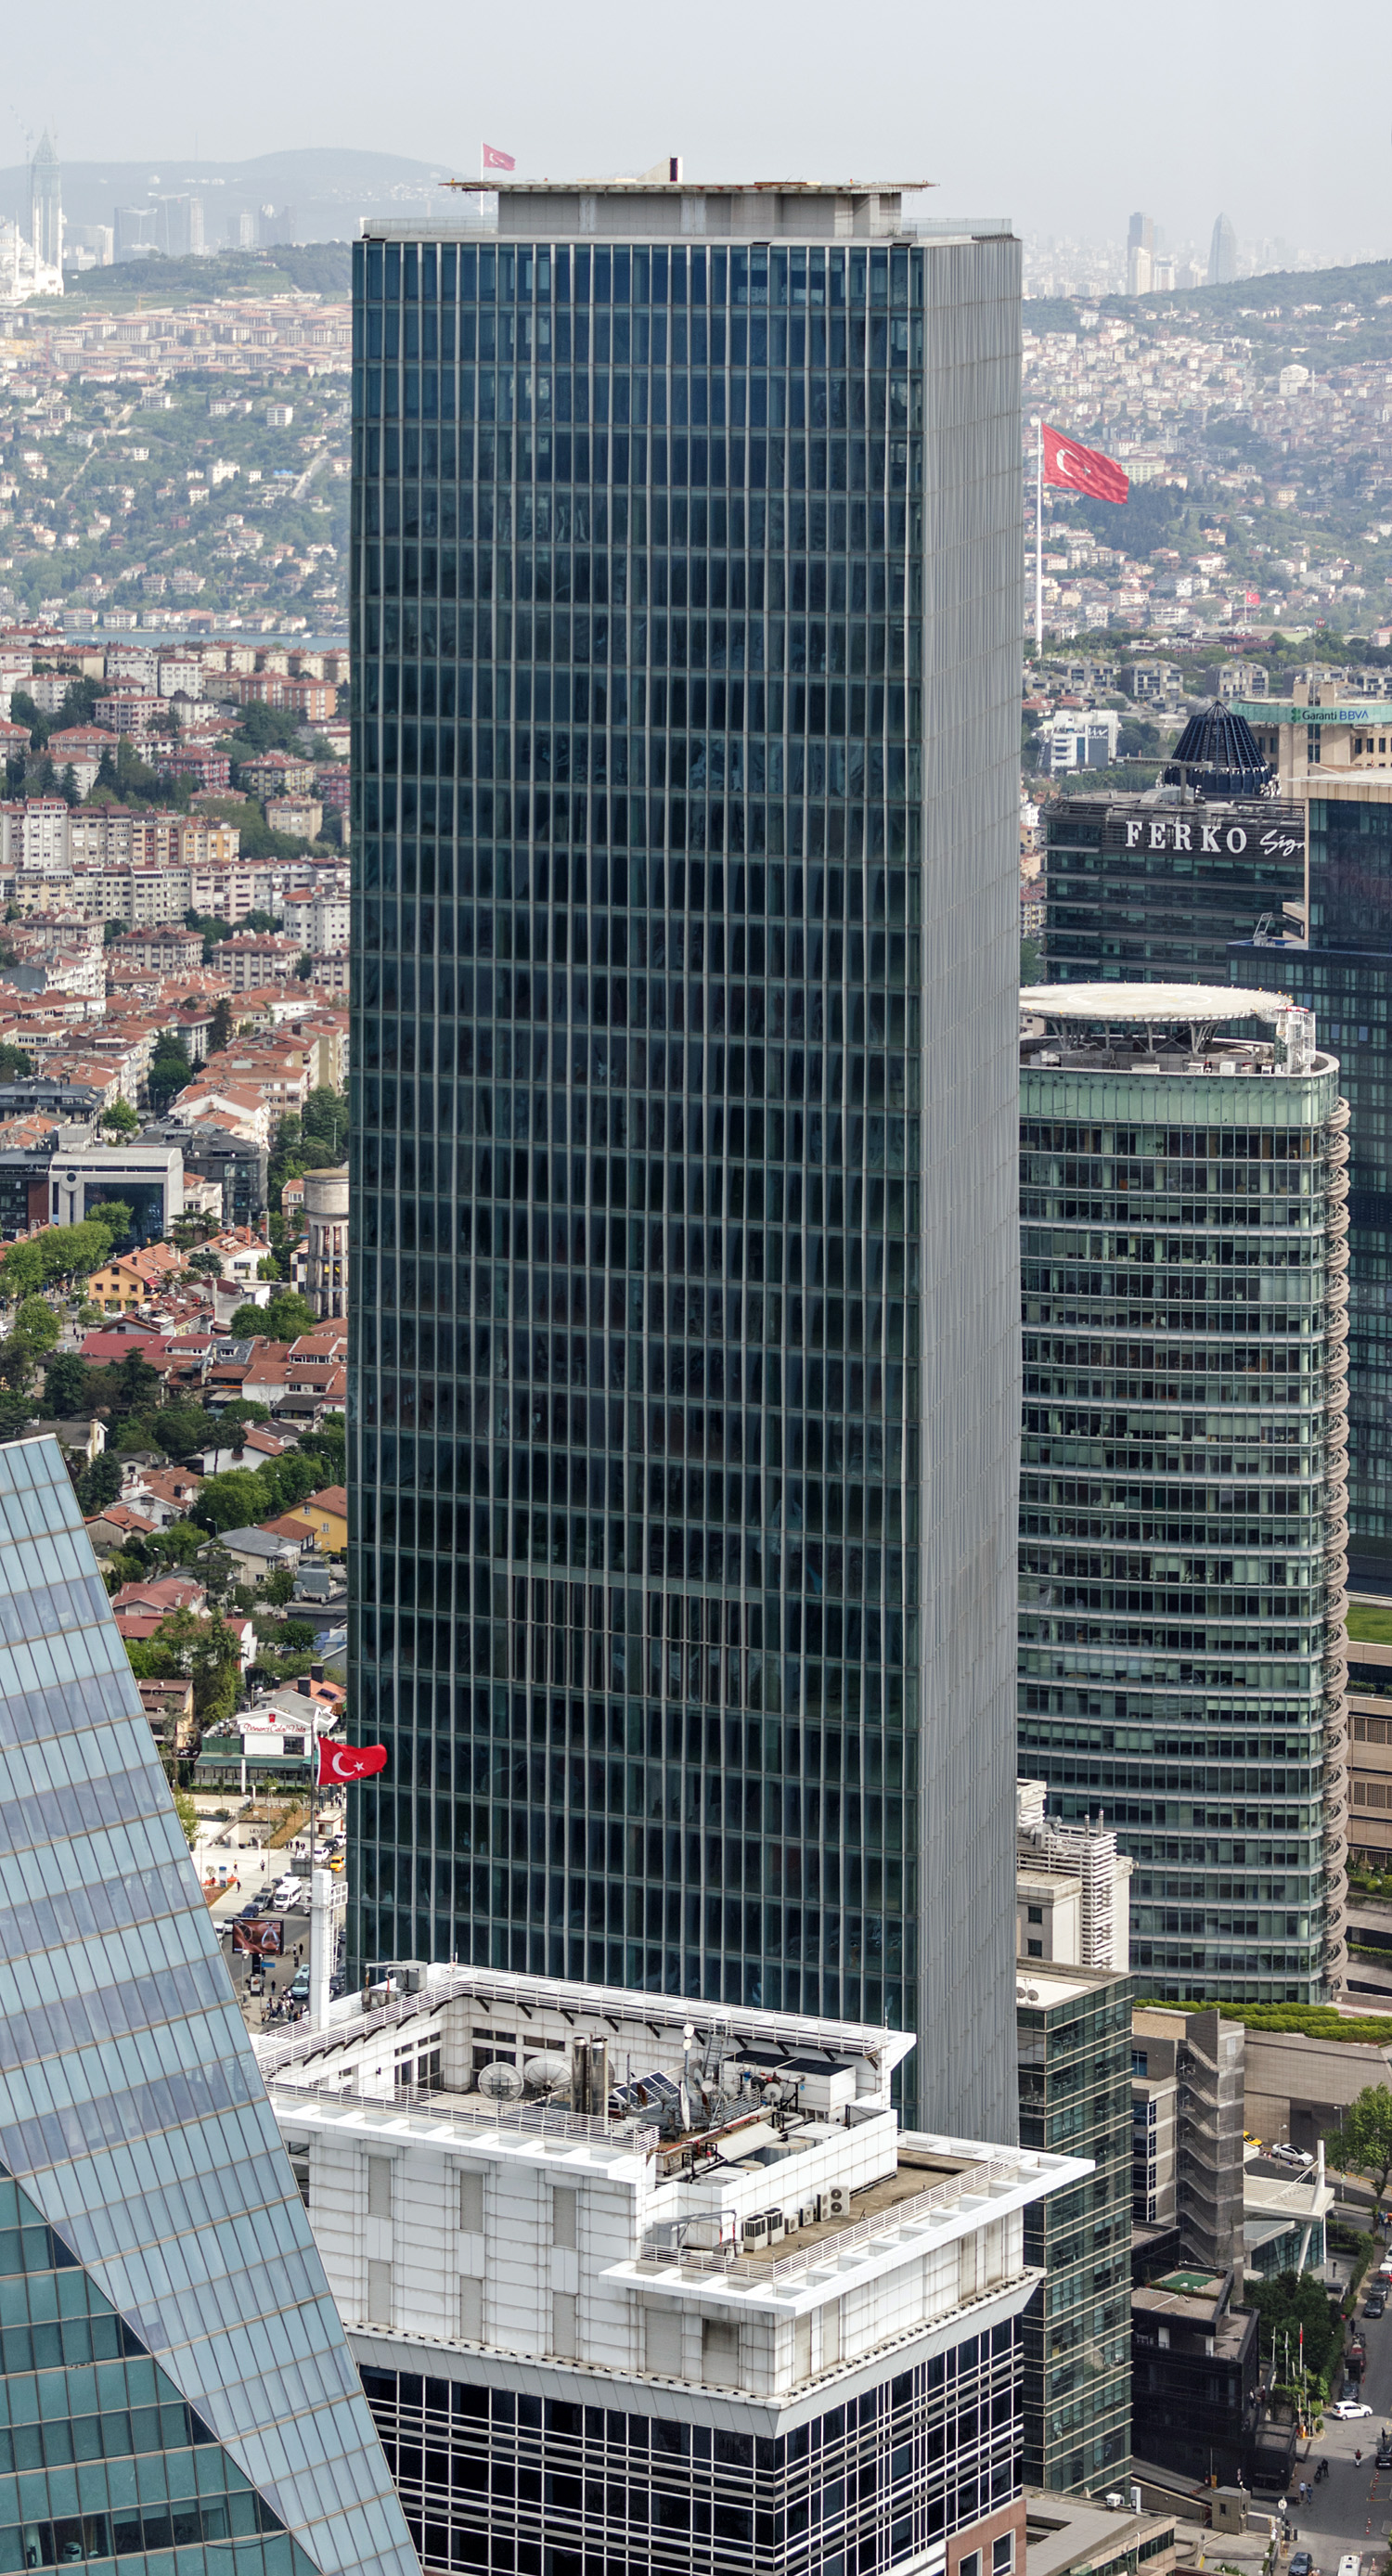 Istanbul Tower 205, Istanbul - View from Sapphire Tower. © Mathias Beinling